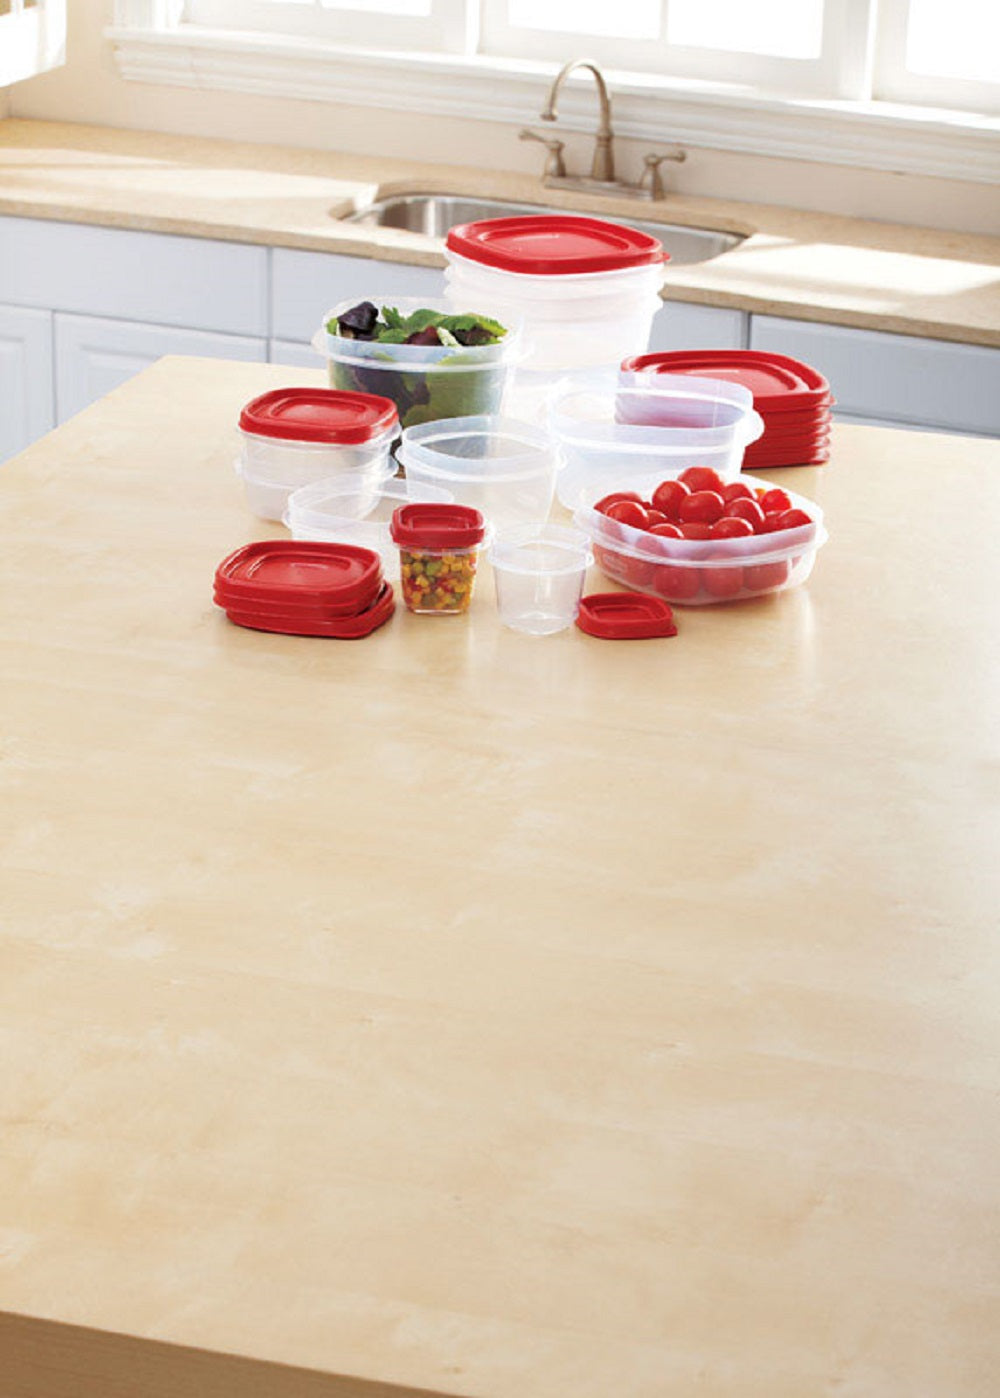 Rubbermaid 1903846 Food Storage Container Set With Lid, 24 Piece Set